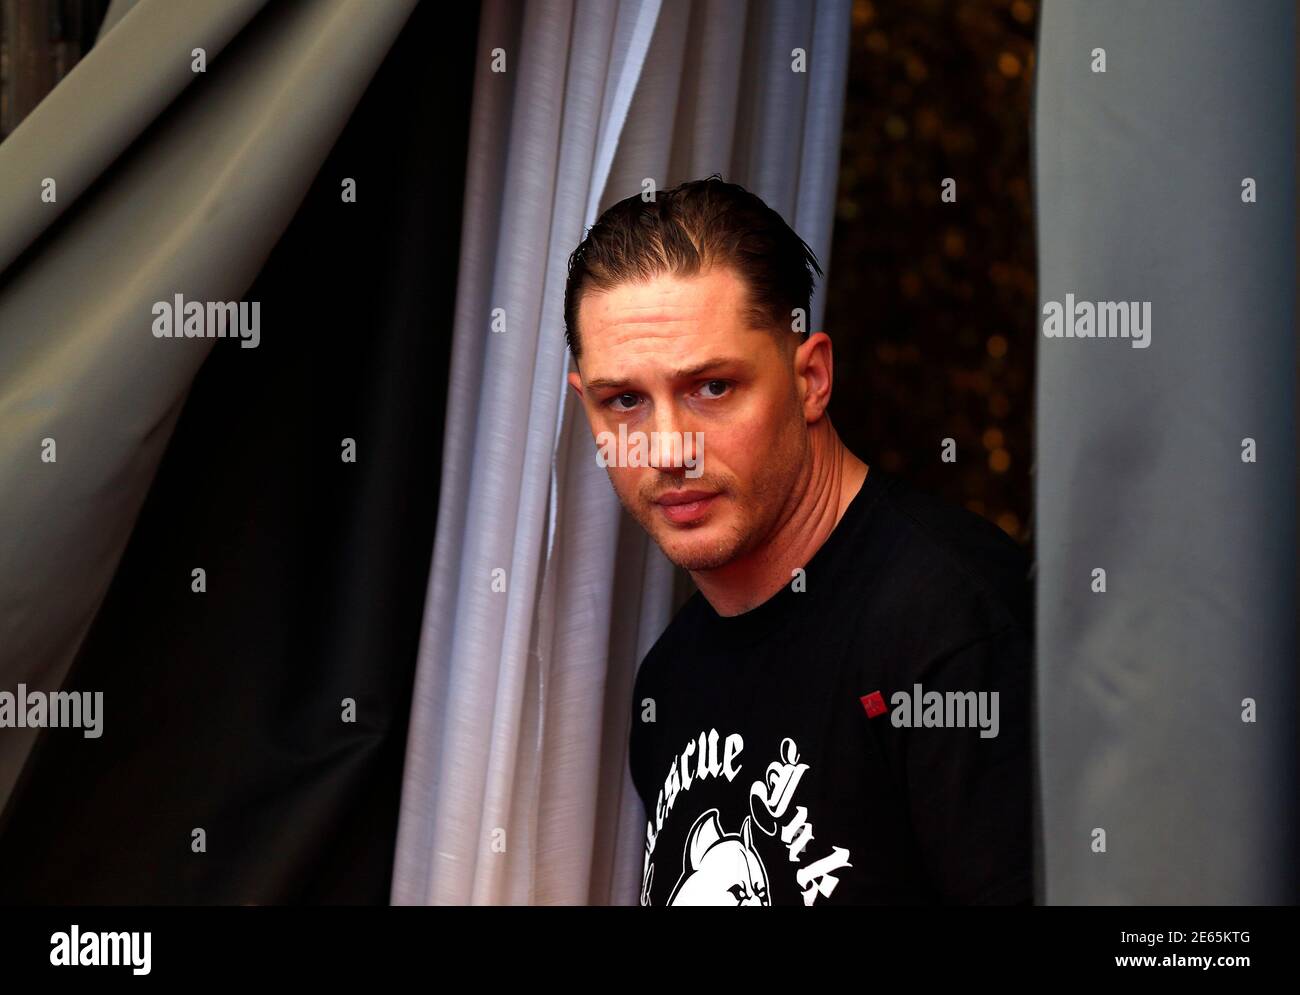 Cast member Tom Hardy is pictured during a photocall for the movie 'Locke', directed by Steven Knight, during the 70th Venice Film Festival in Venice September 2, 2013. REUTERS/Alessandro Bianchi (ITALY - Tags: ENTERTAINMENT HEADSHOT) Stock Photo